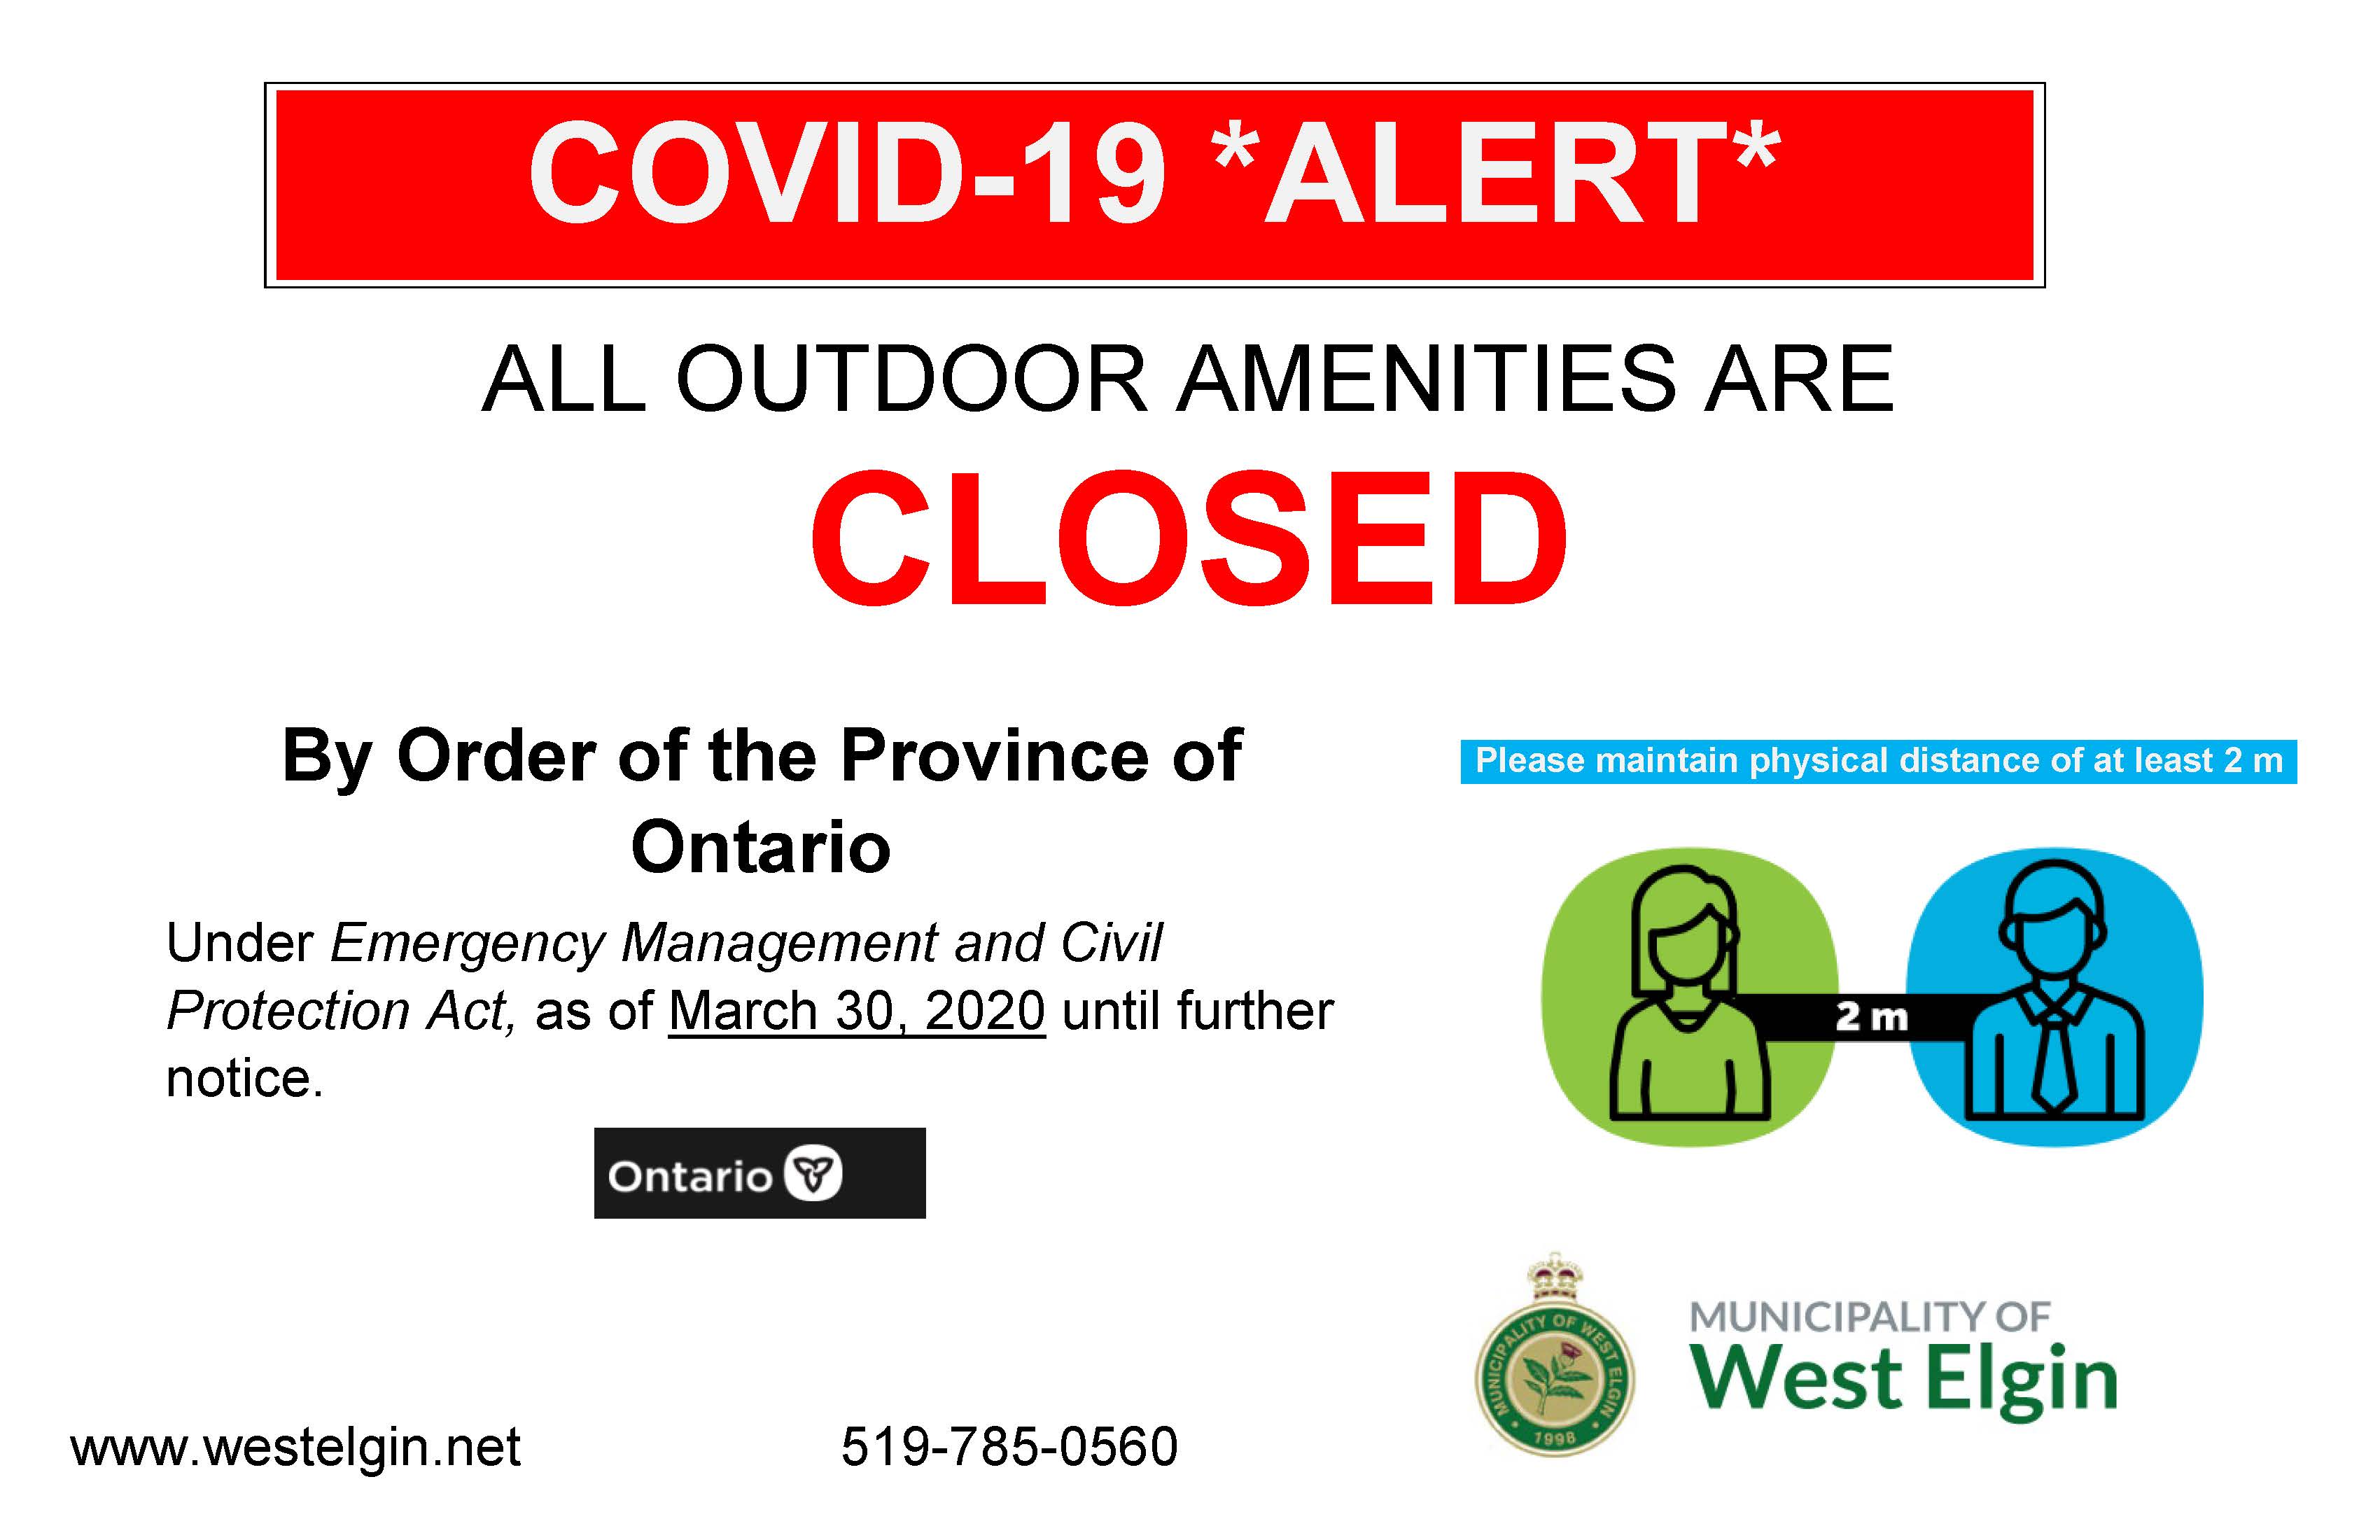 All outdoor amenities are closed